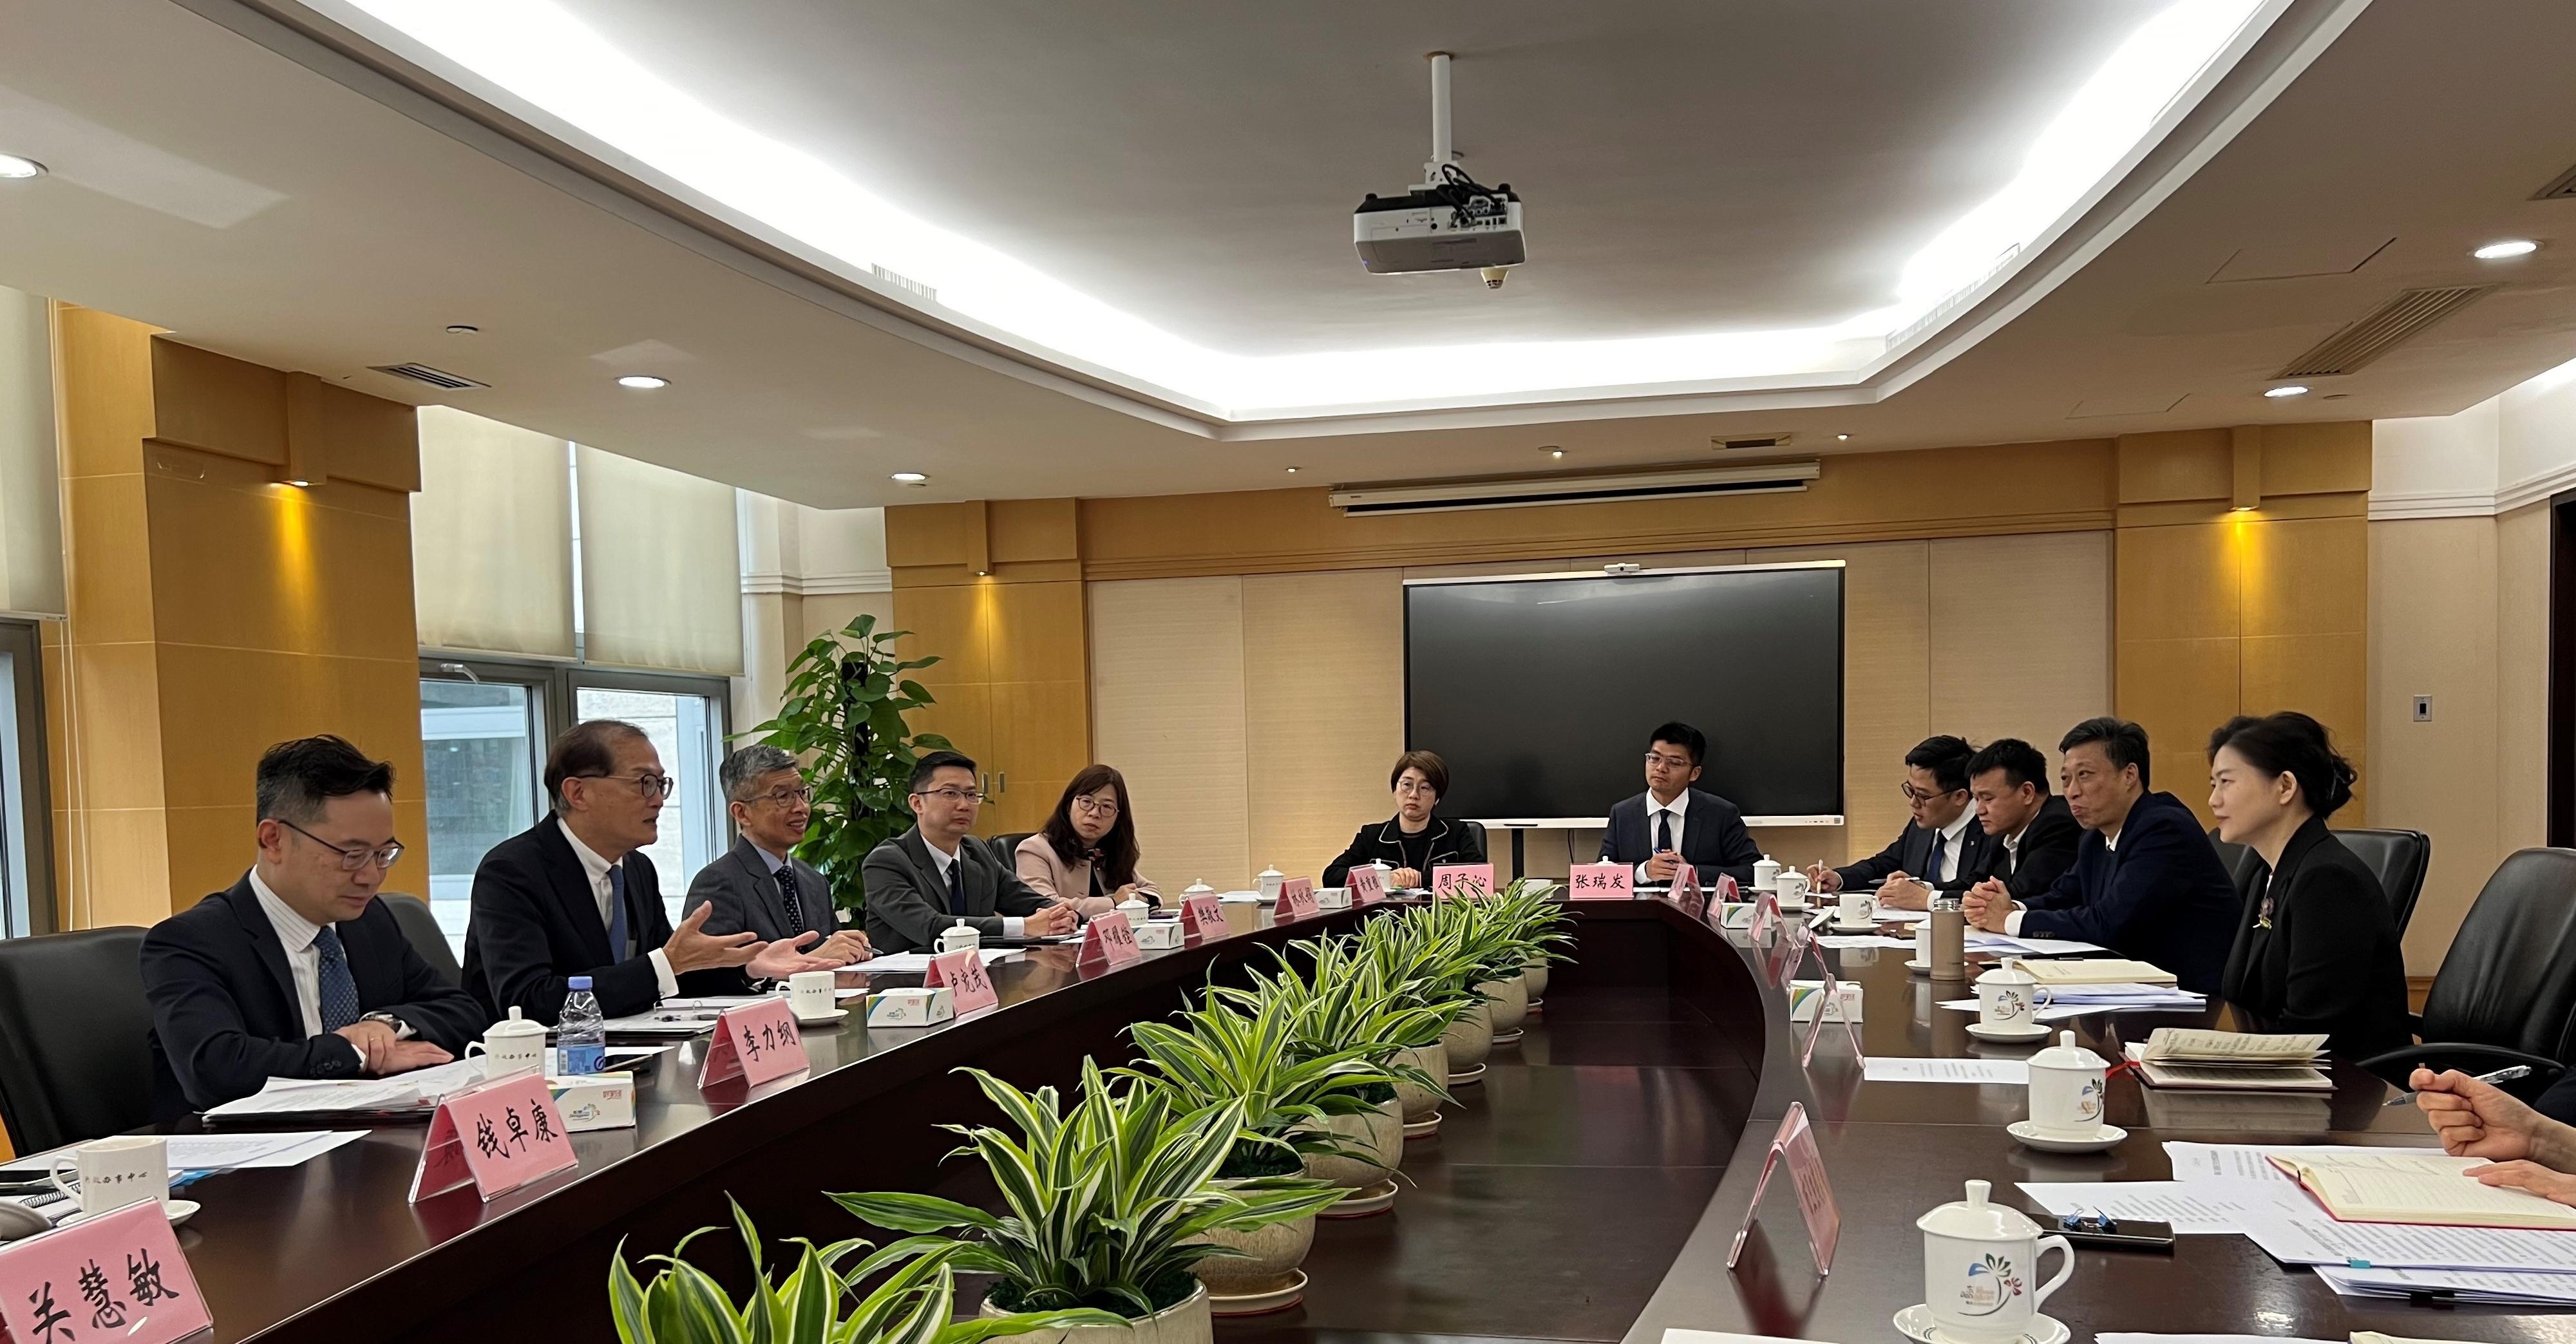 The Secretary for Health, Professor Lo Chung-mau (second left), and his delegation meet Deputy Mayor of the Dongguan Municipal People's Government Ms Li Jun (first right) to introduce to her and other Dongguan Municipal Government and health officials the latest healthcare developments in Hong Kong, with Deputy Secretary for Health Mr Eddie Lee (first left); the Senior Advisor (Secretary for Health's Office), Dr Joe Fan (fourth left); and the Deputising Chief Executive of the Hospital Authority, Dr Simon Tang (third left), in attendance.